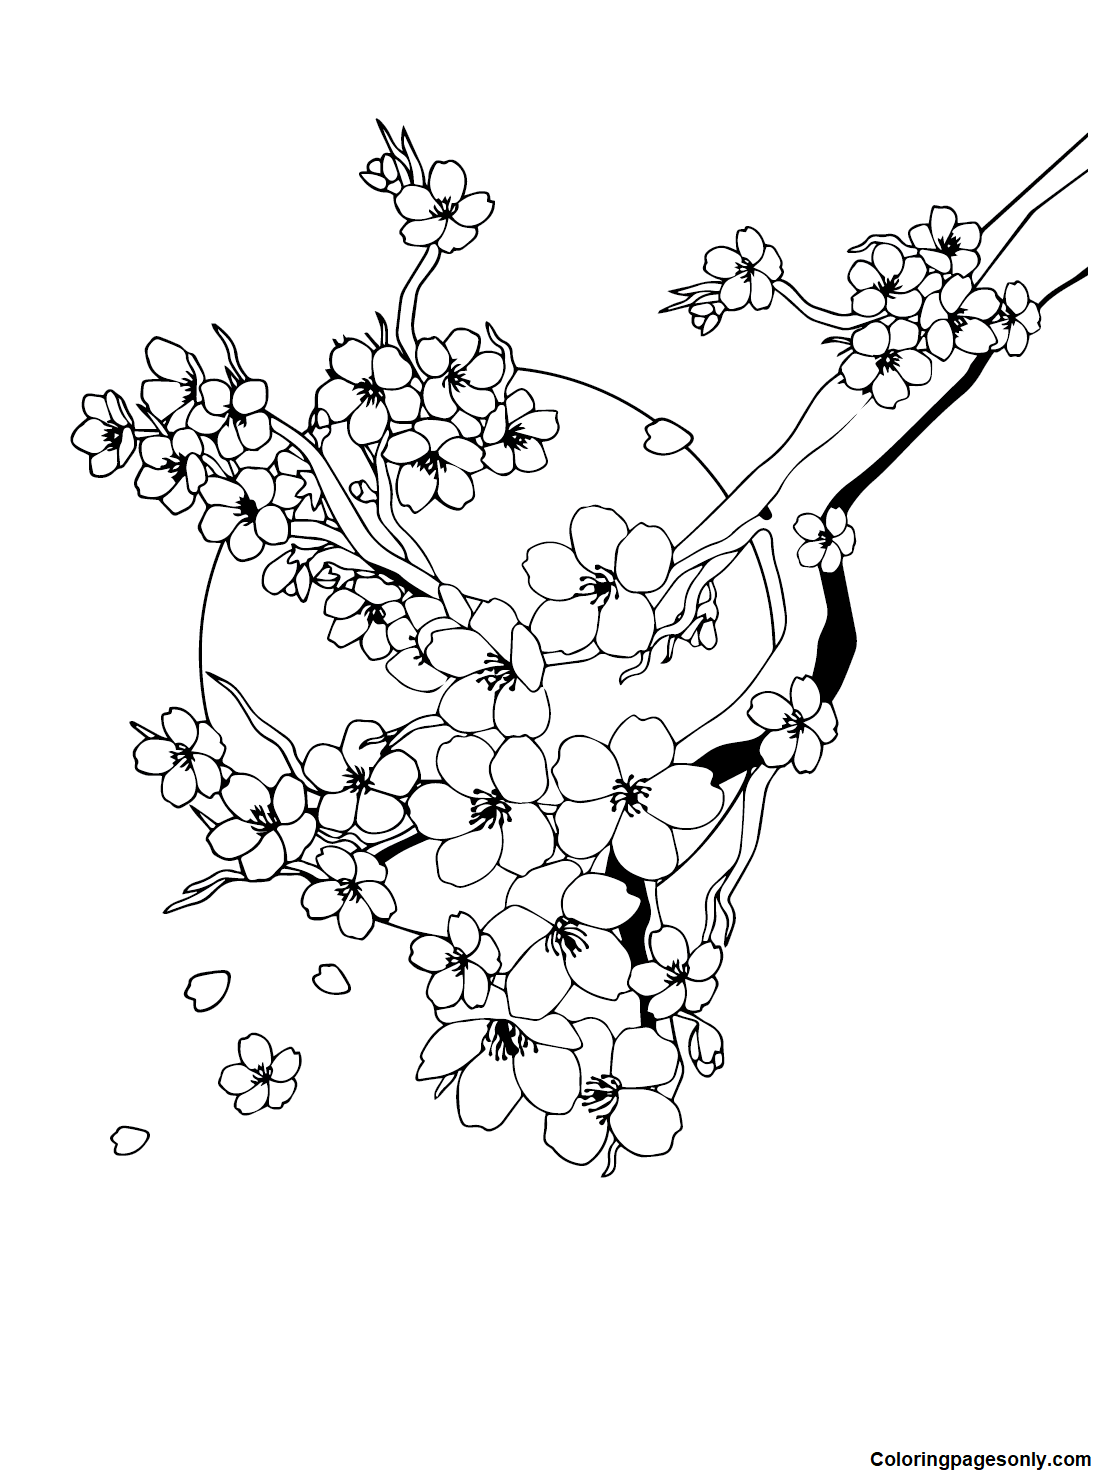 Cherry Blossom Free Coloring Page